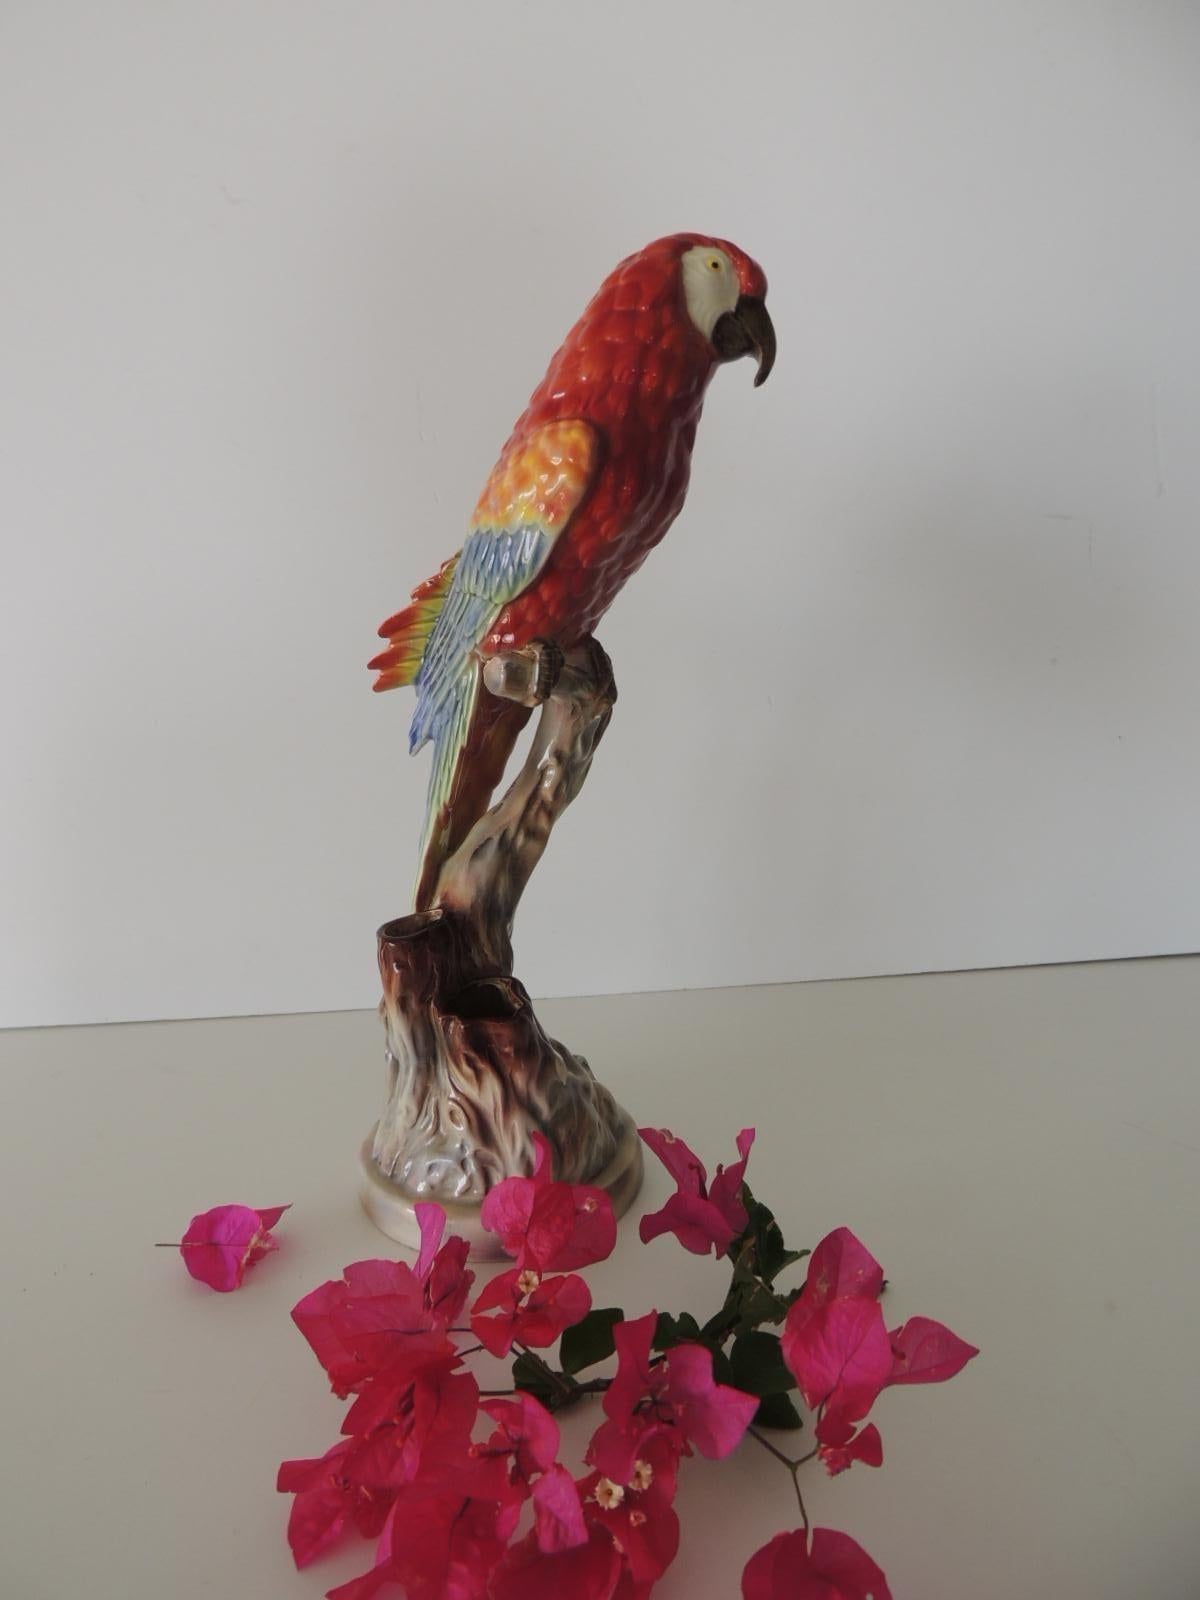 Will George California Porcelain Art Pottery Macaw Parrot Figurine Vase, 1940's 1